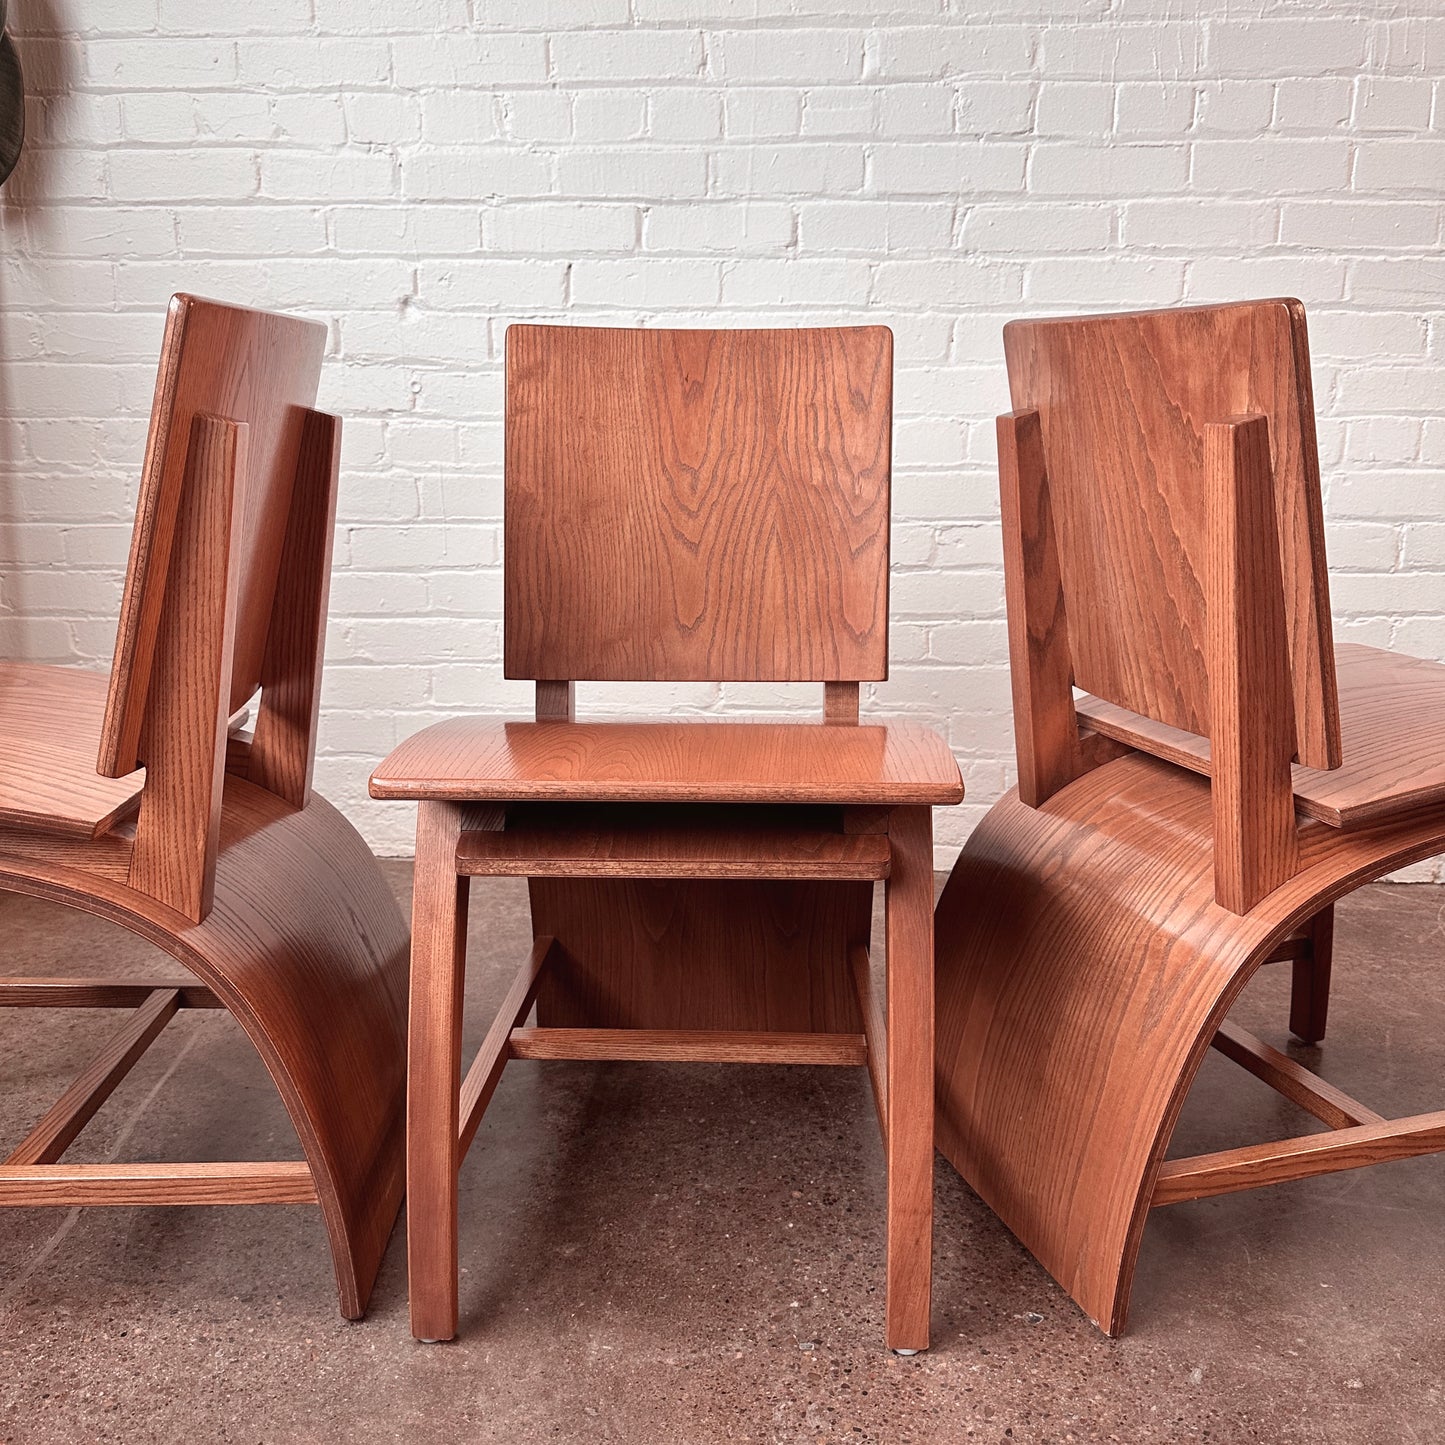 BENTWOOD CHAIRS BY ROBERT BLAIR - SET OF 4